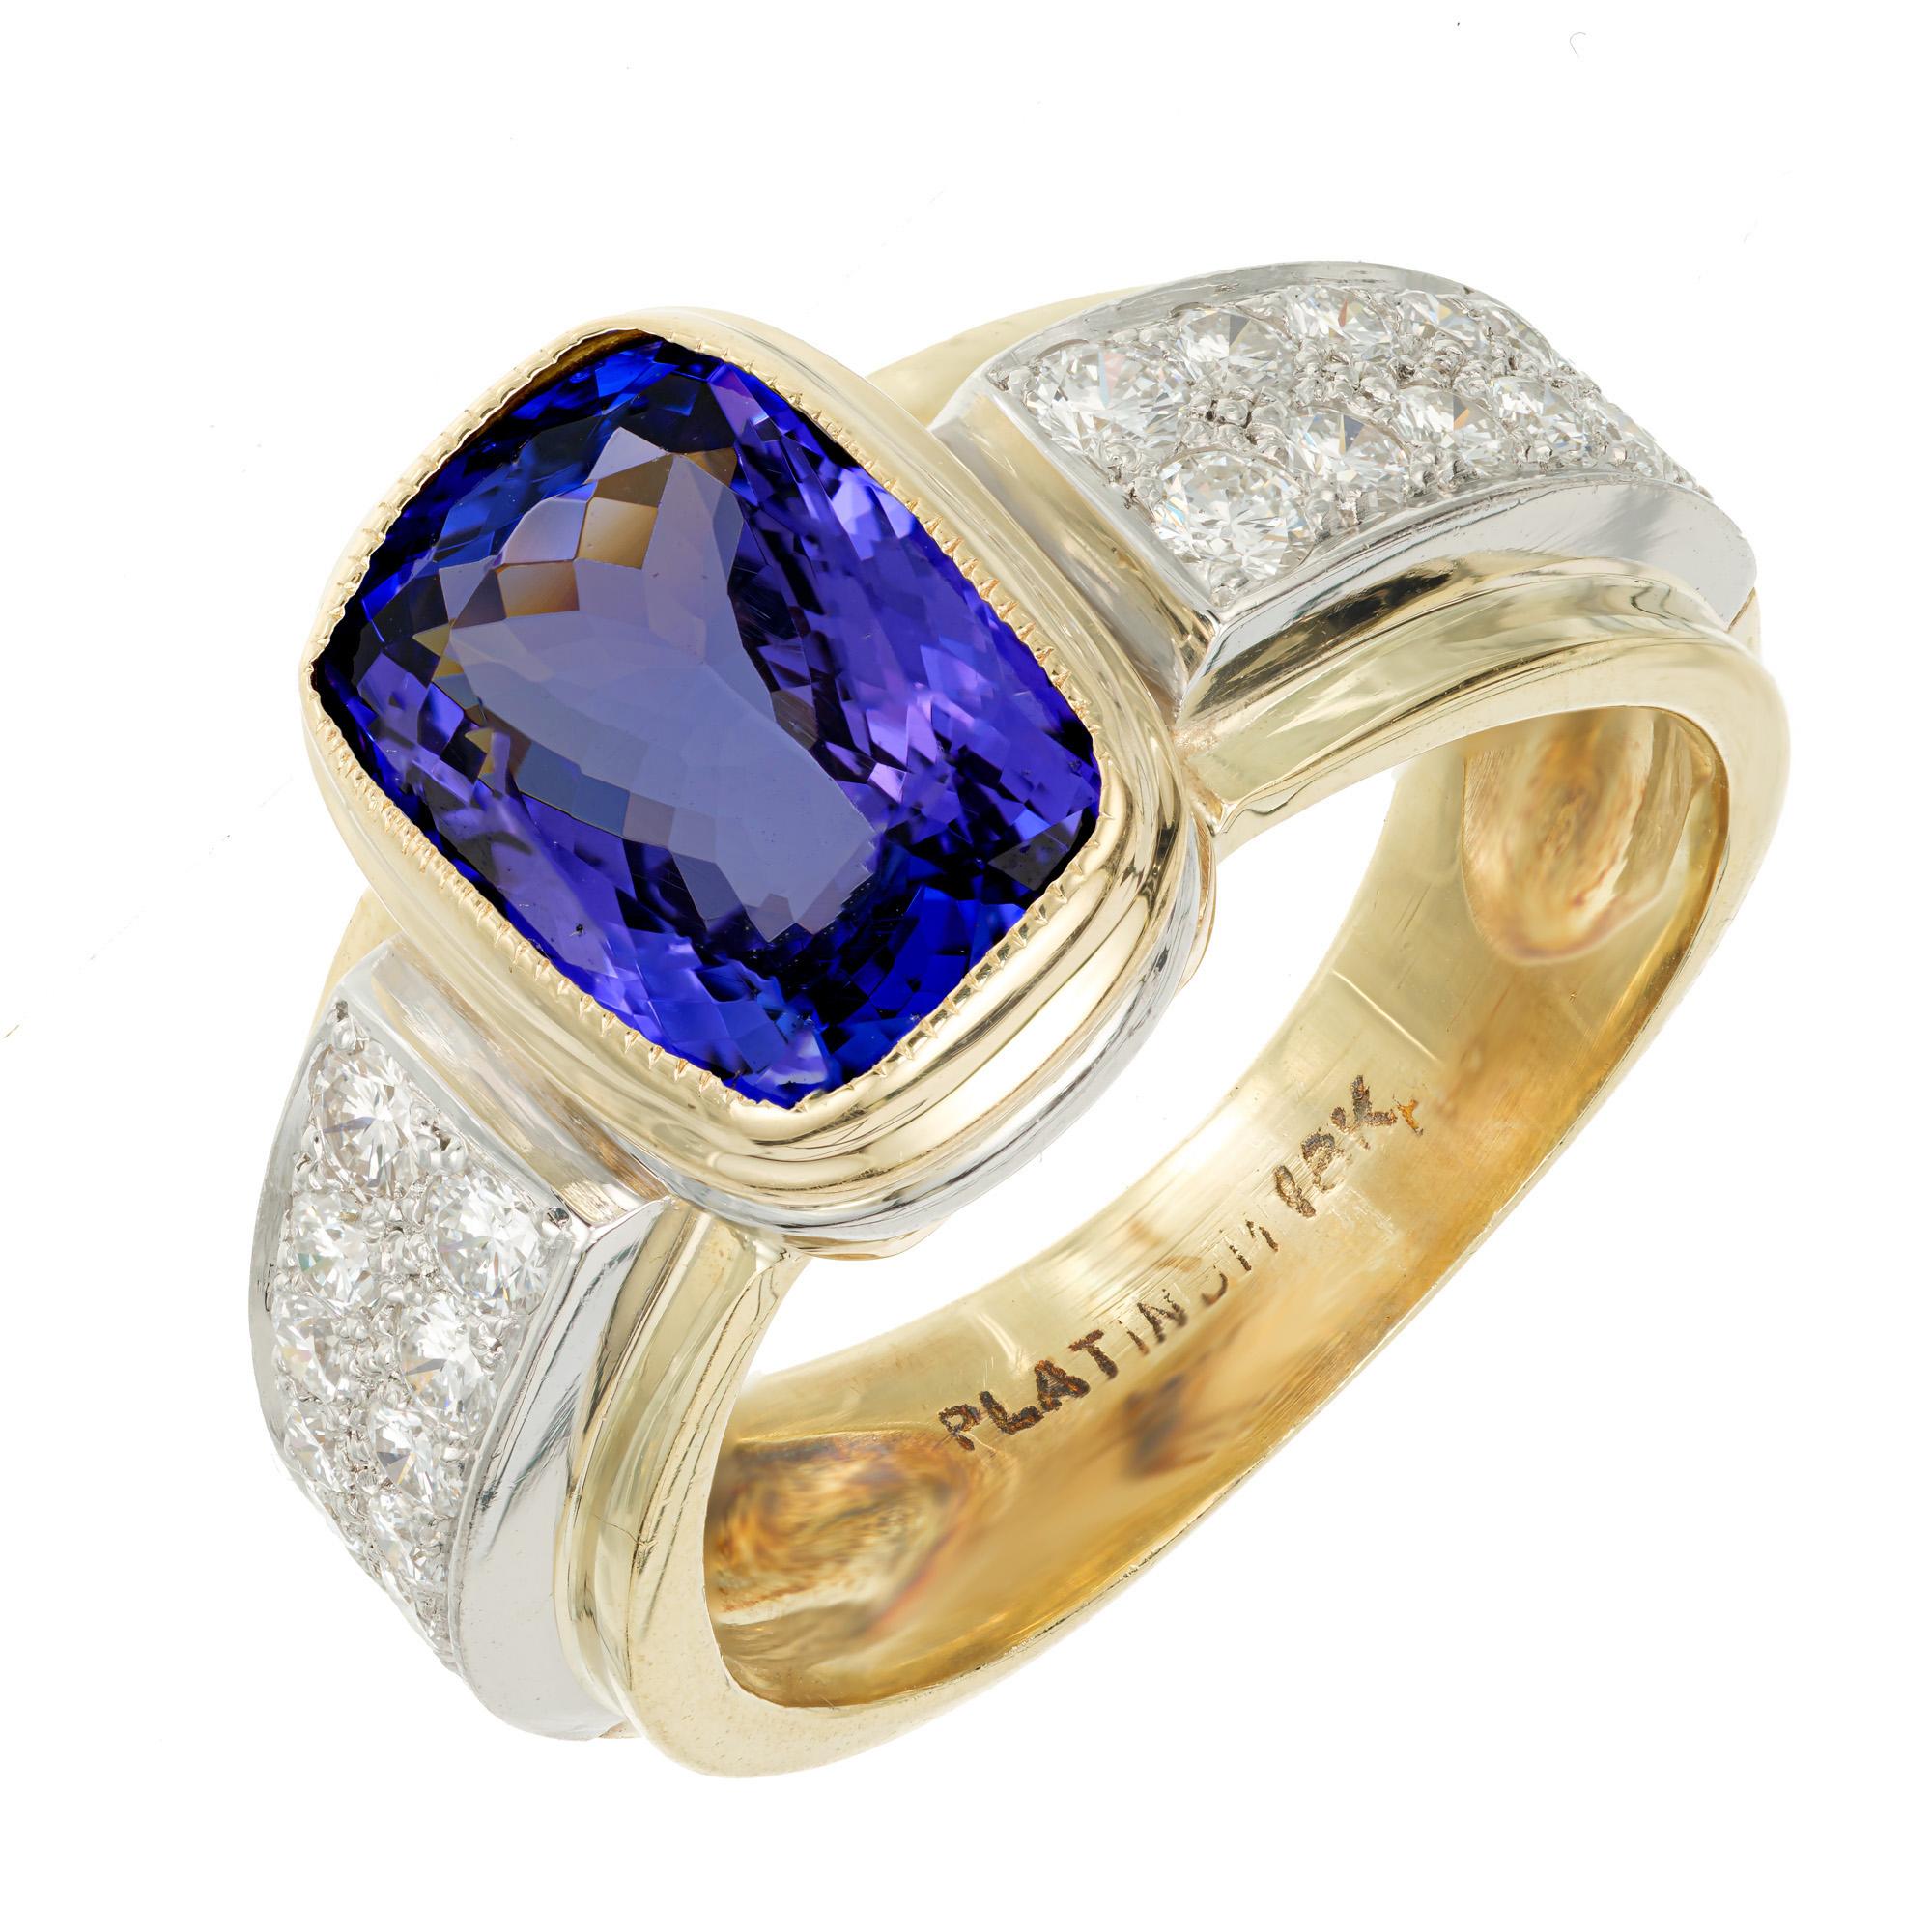 1970's Tanzanite and diamond ring. 4.08ct cushion cut bezel set Tanzanite center stone placed in an 18k yellow gold and platinum ring. Accented with 28 round pave set diamonds which are set in platinum. The Tanzanite also has a ring of Platinum